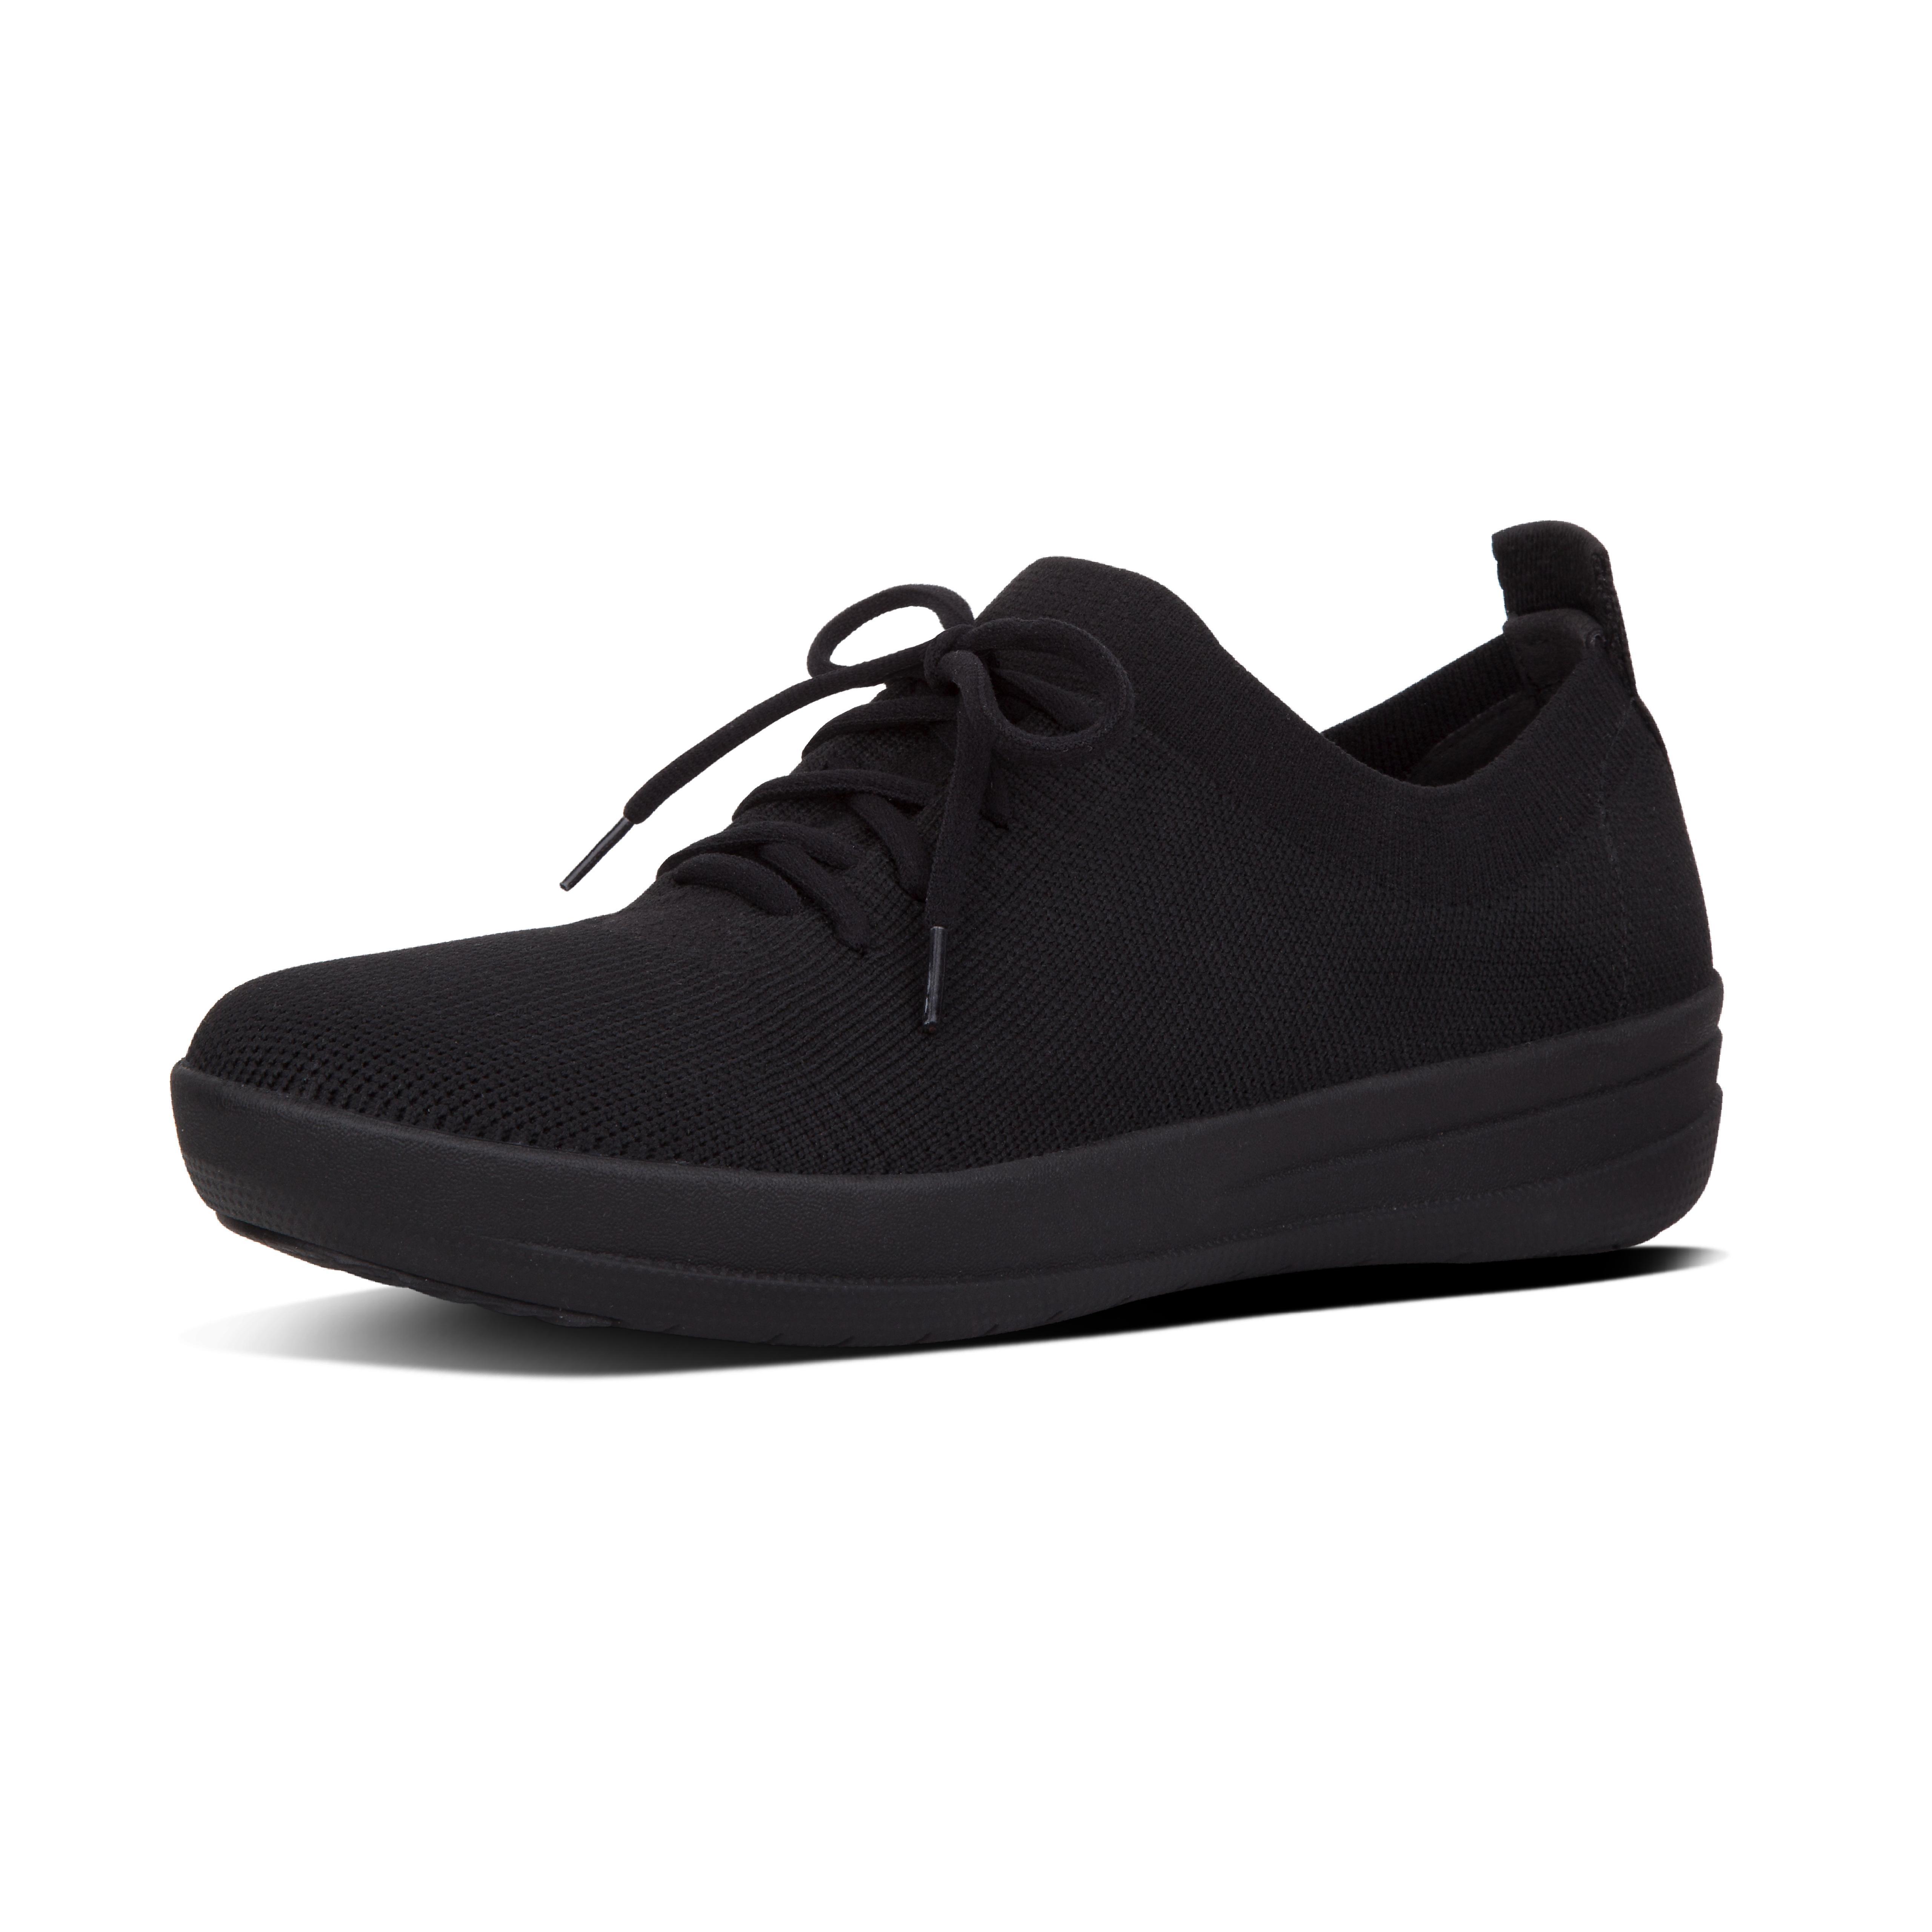 Fitflop Synthetic F-sporty Überknit Tm Sneakers Gymnastics Shoes in Black -  Save 14% - Lyst